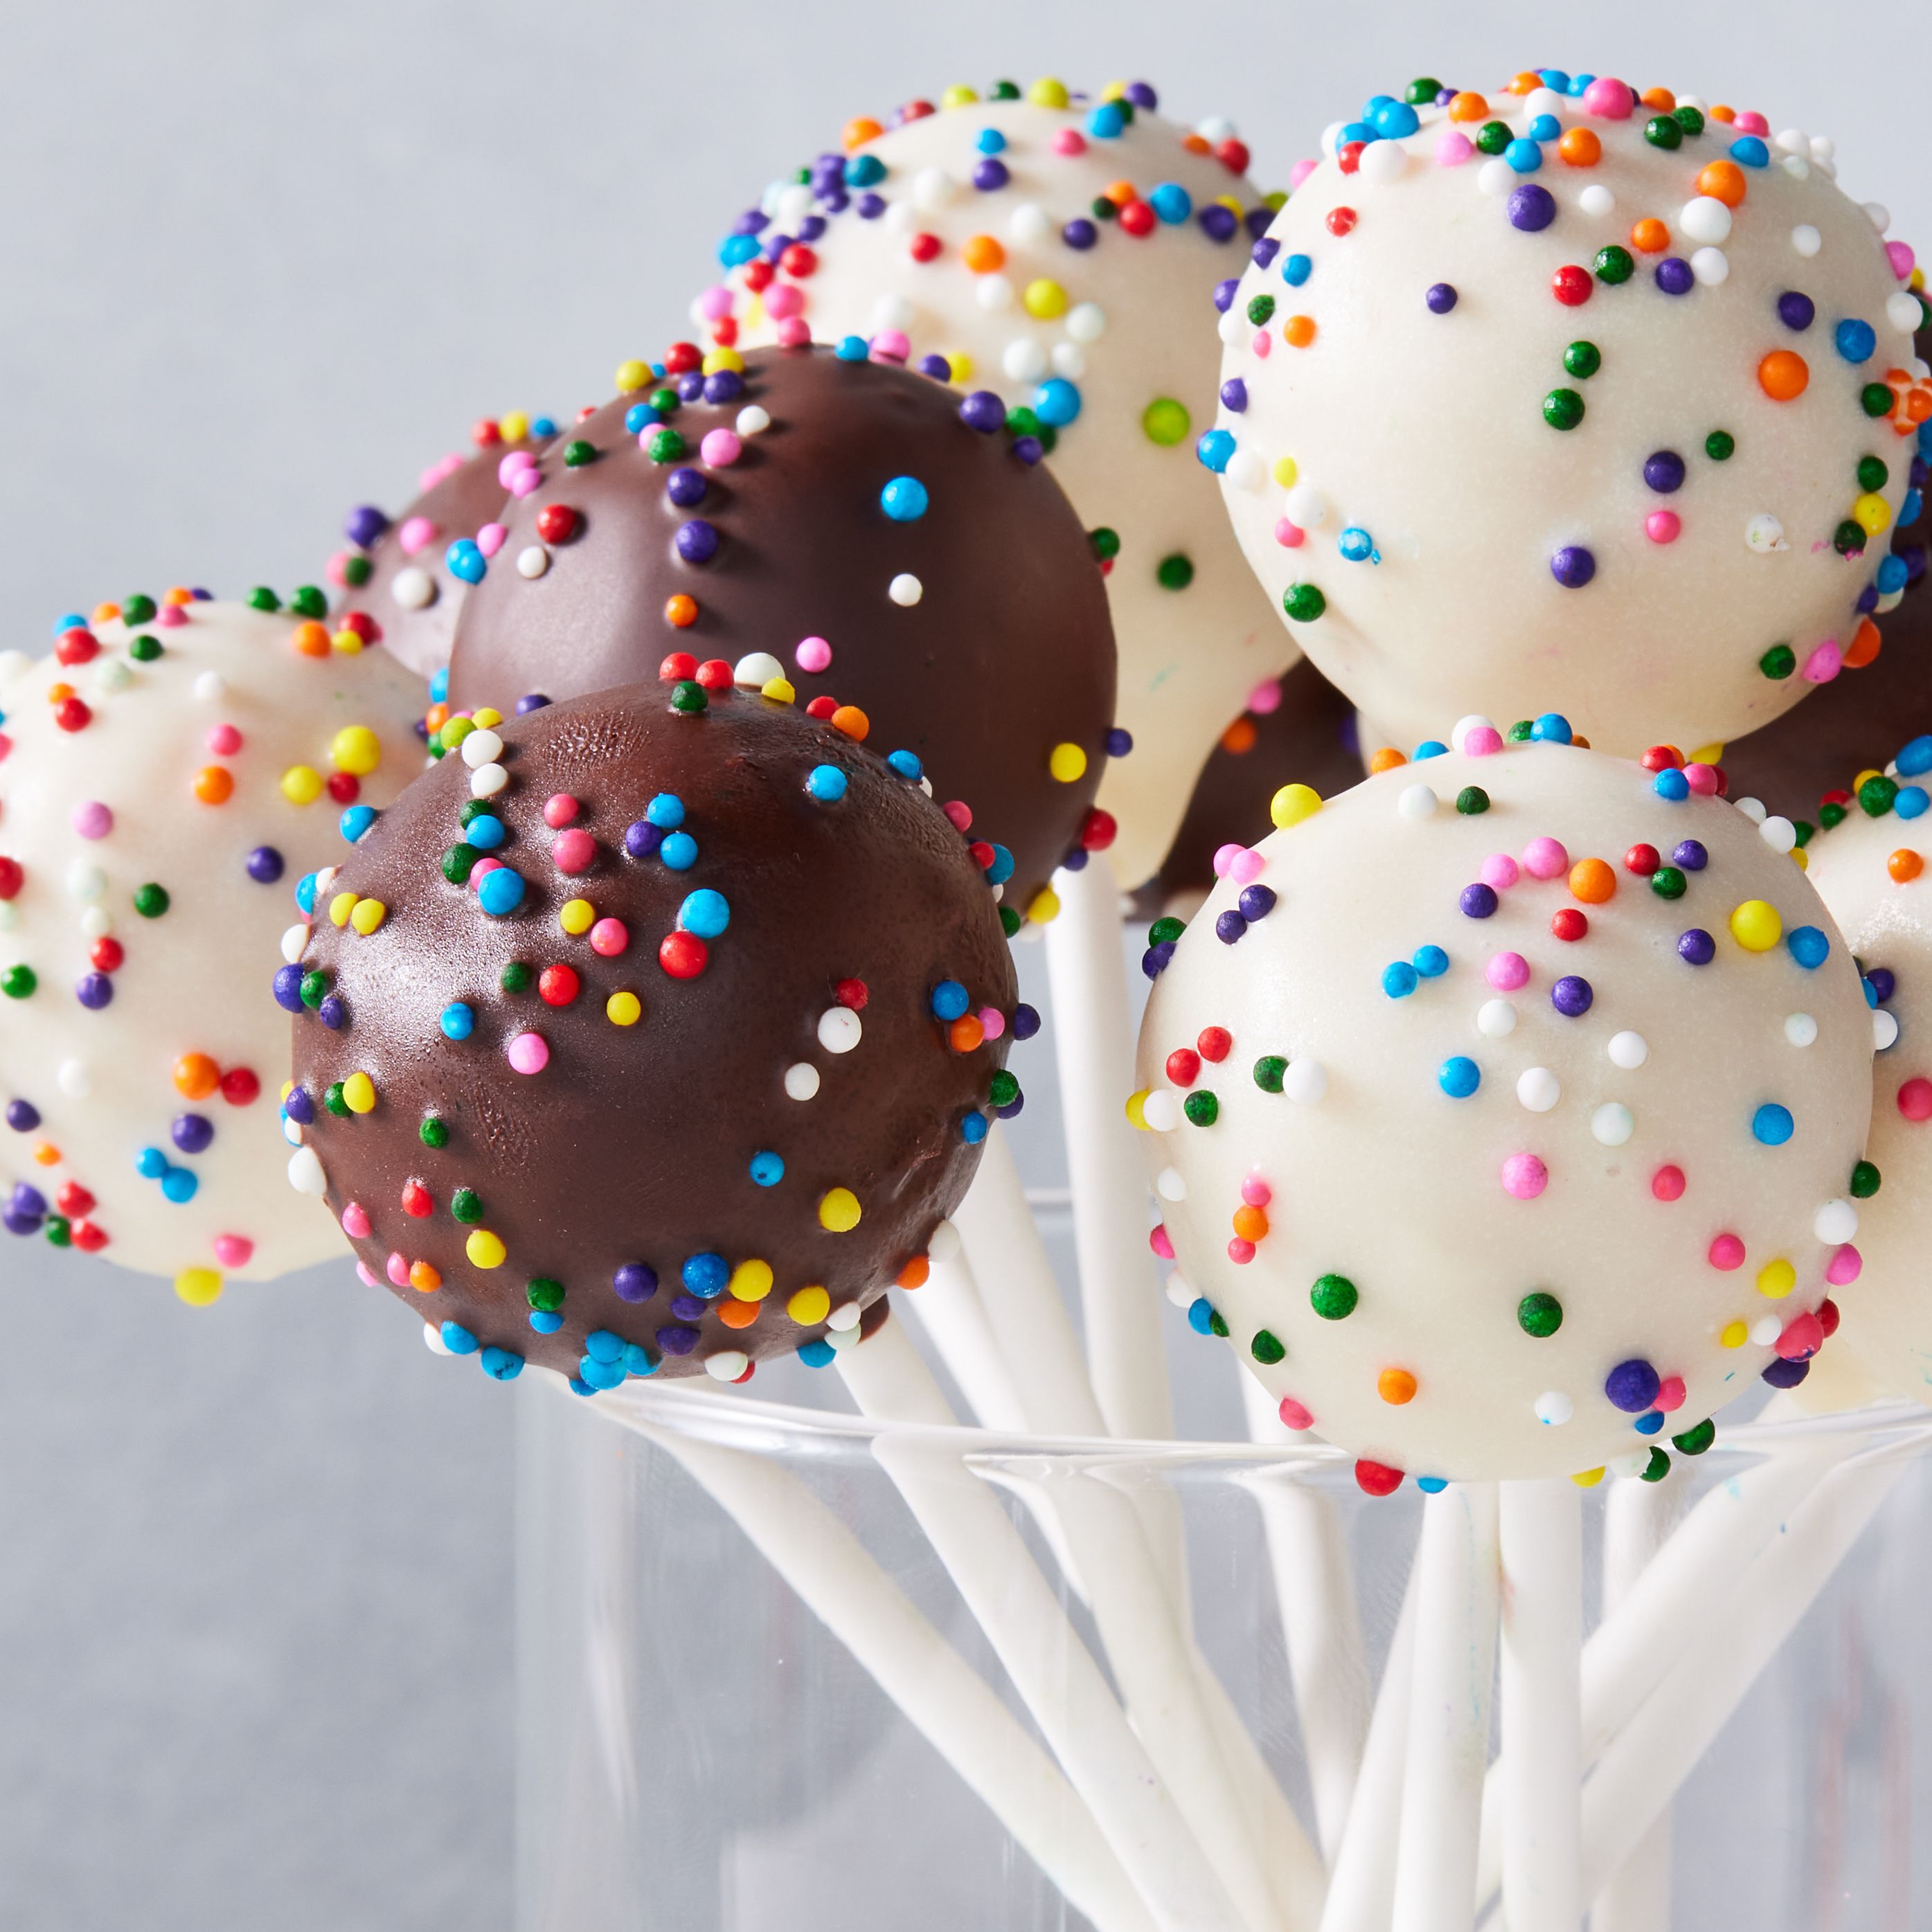 How To Make Delicious German Chocolate Cake Pops